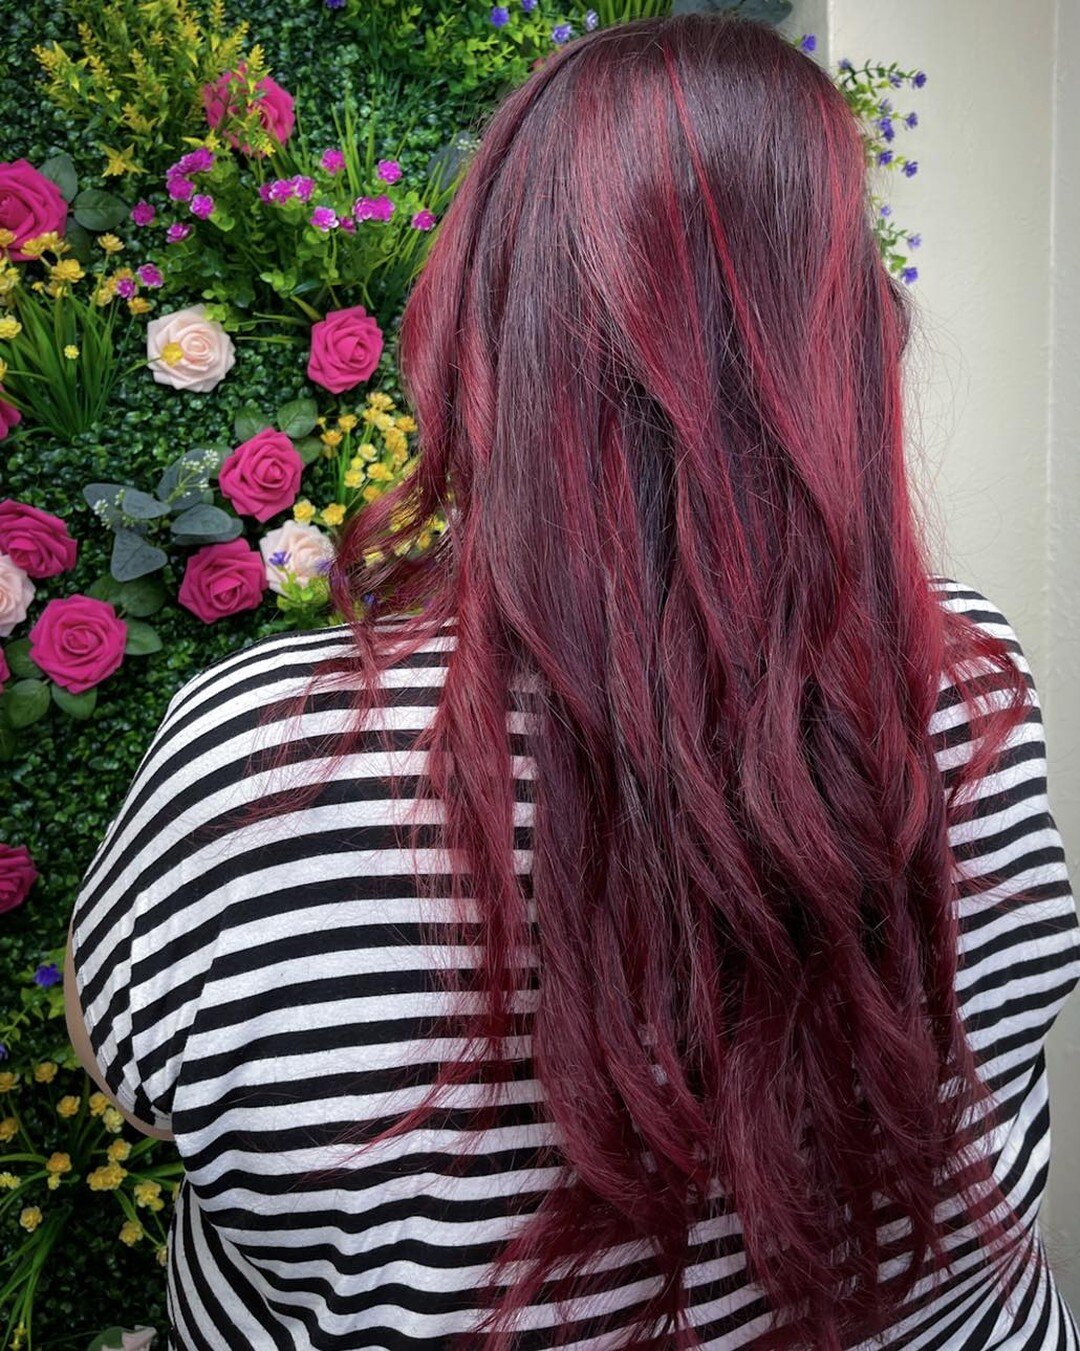 ❤️ We are RED-y for fall, are you?! Call to book your appointment 📱 #lookgoodfeelgorgeous
⭐️Balayage, haircut and style by Destiny. 
#modesalon #arlingtontx #teammode #modehairsalon #teammodehair #mode #hairsalon #hairstylist #balayage #vividbalayag